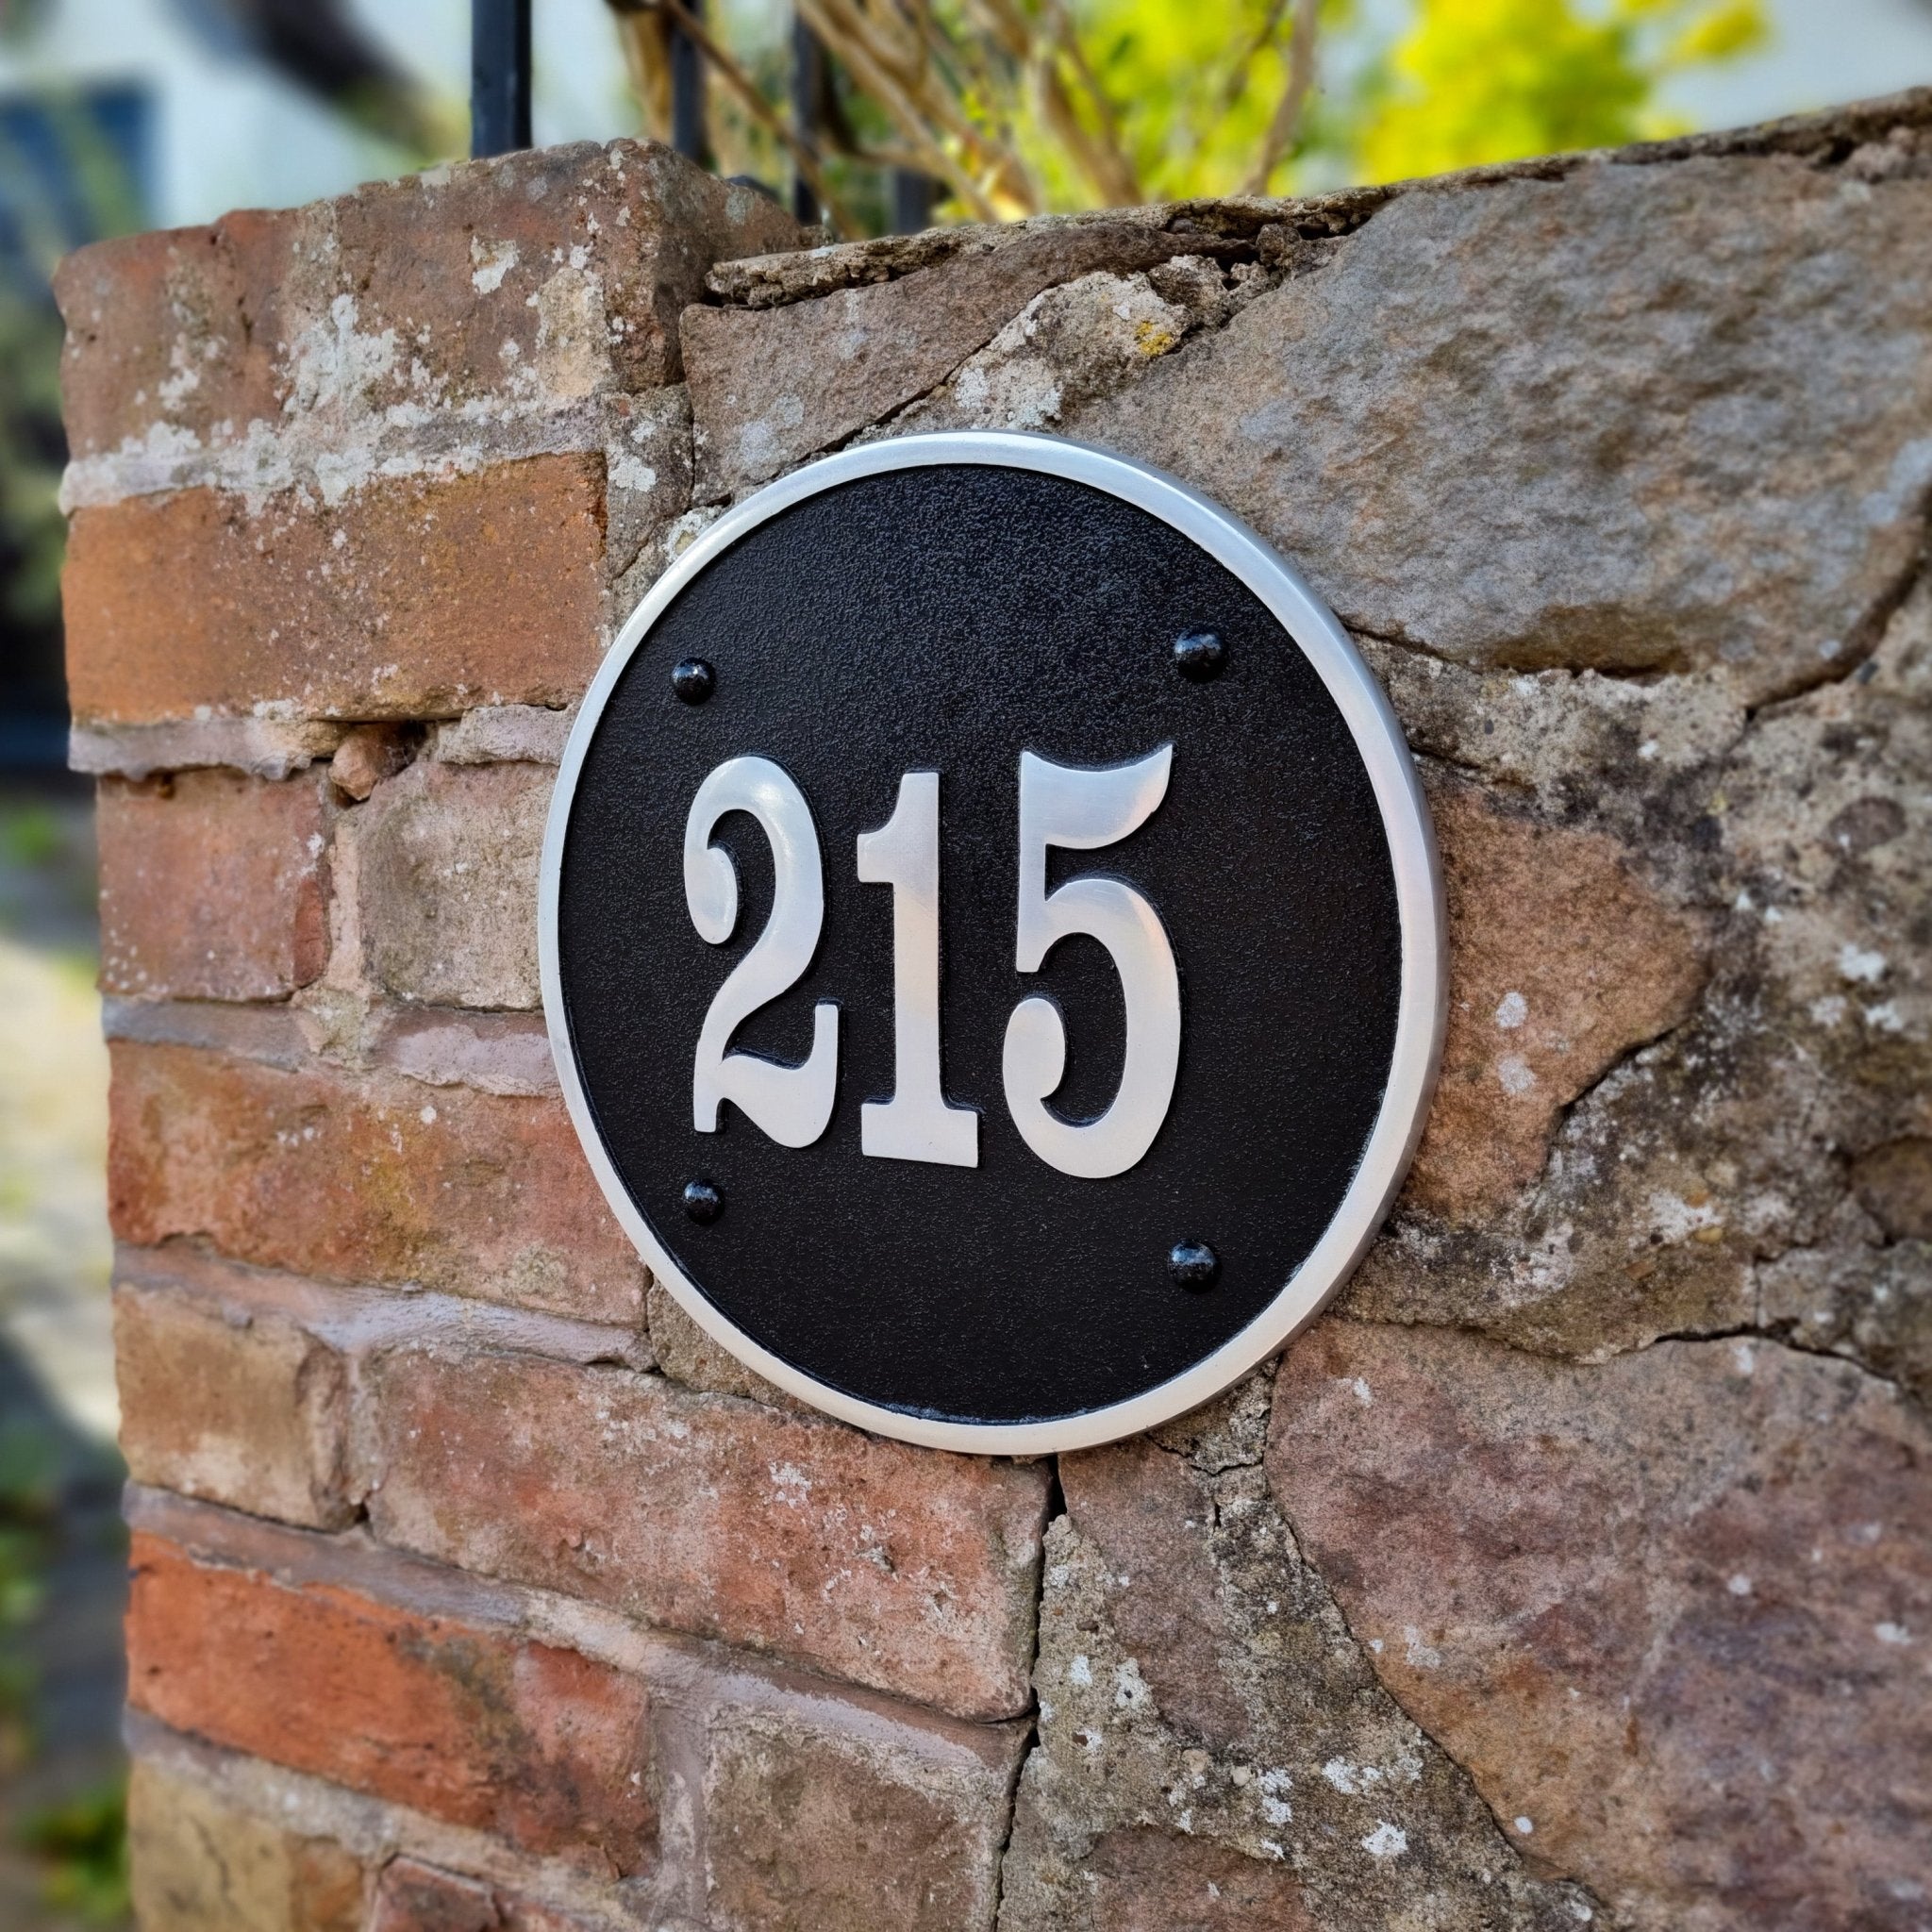 Large Round Modern Style House Number Sign - The Metal Foundry